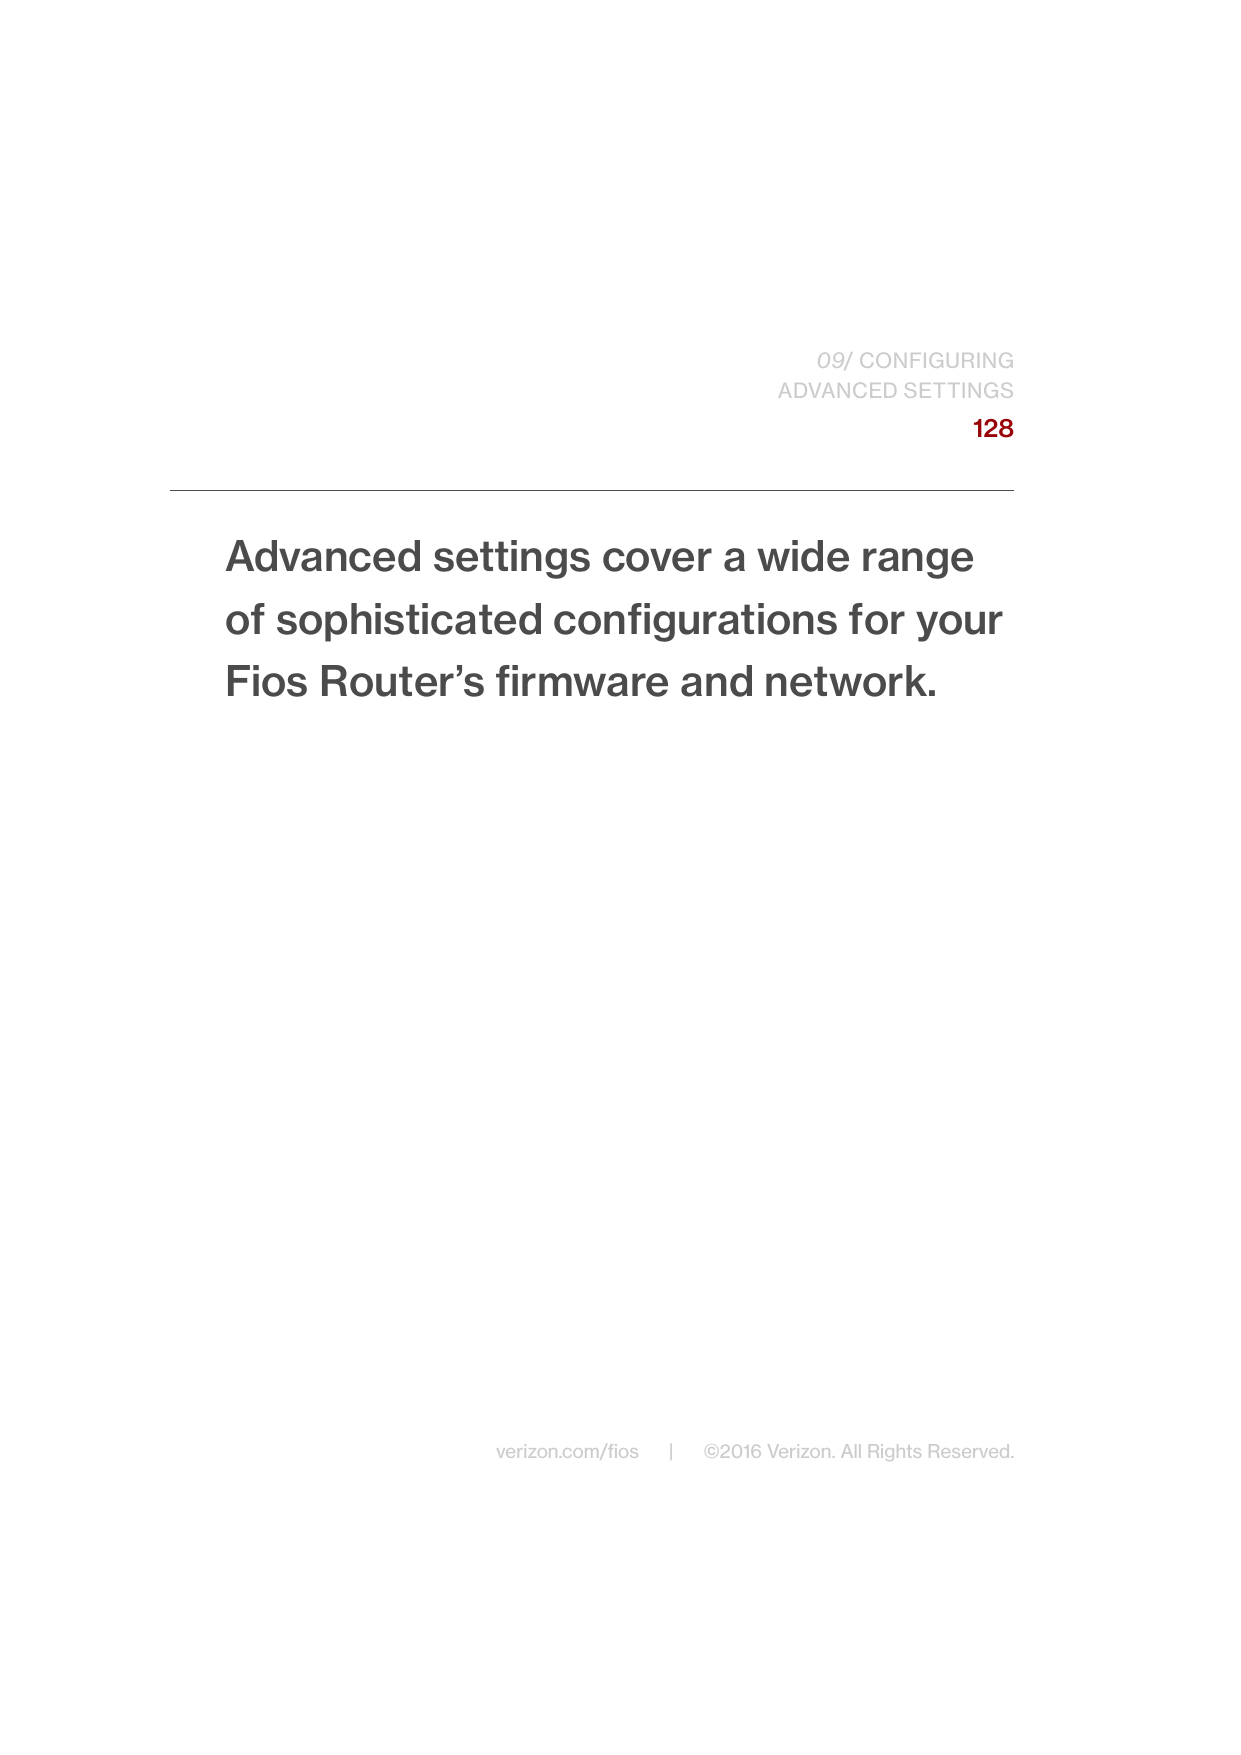 128verizon.com/ﬁos      |      ©2016 Verizon. All Rights Reserved.Advanced settings cover a wide range of sophisticated conﬁgurations for your Fios Router’s ﬁrmware and network./ CONFIGURING ADVANCED SETTINGS